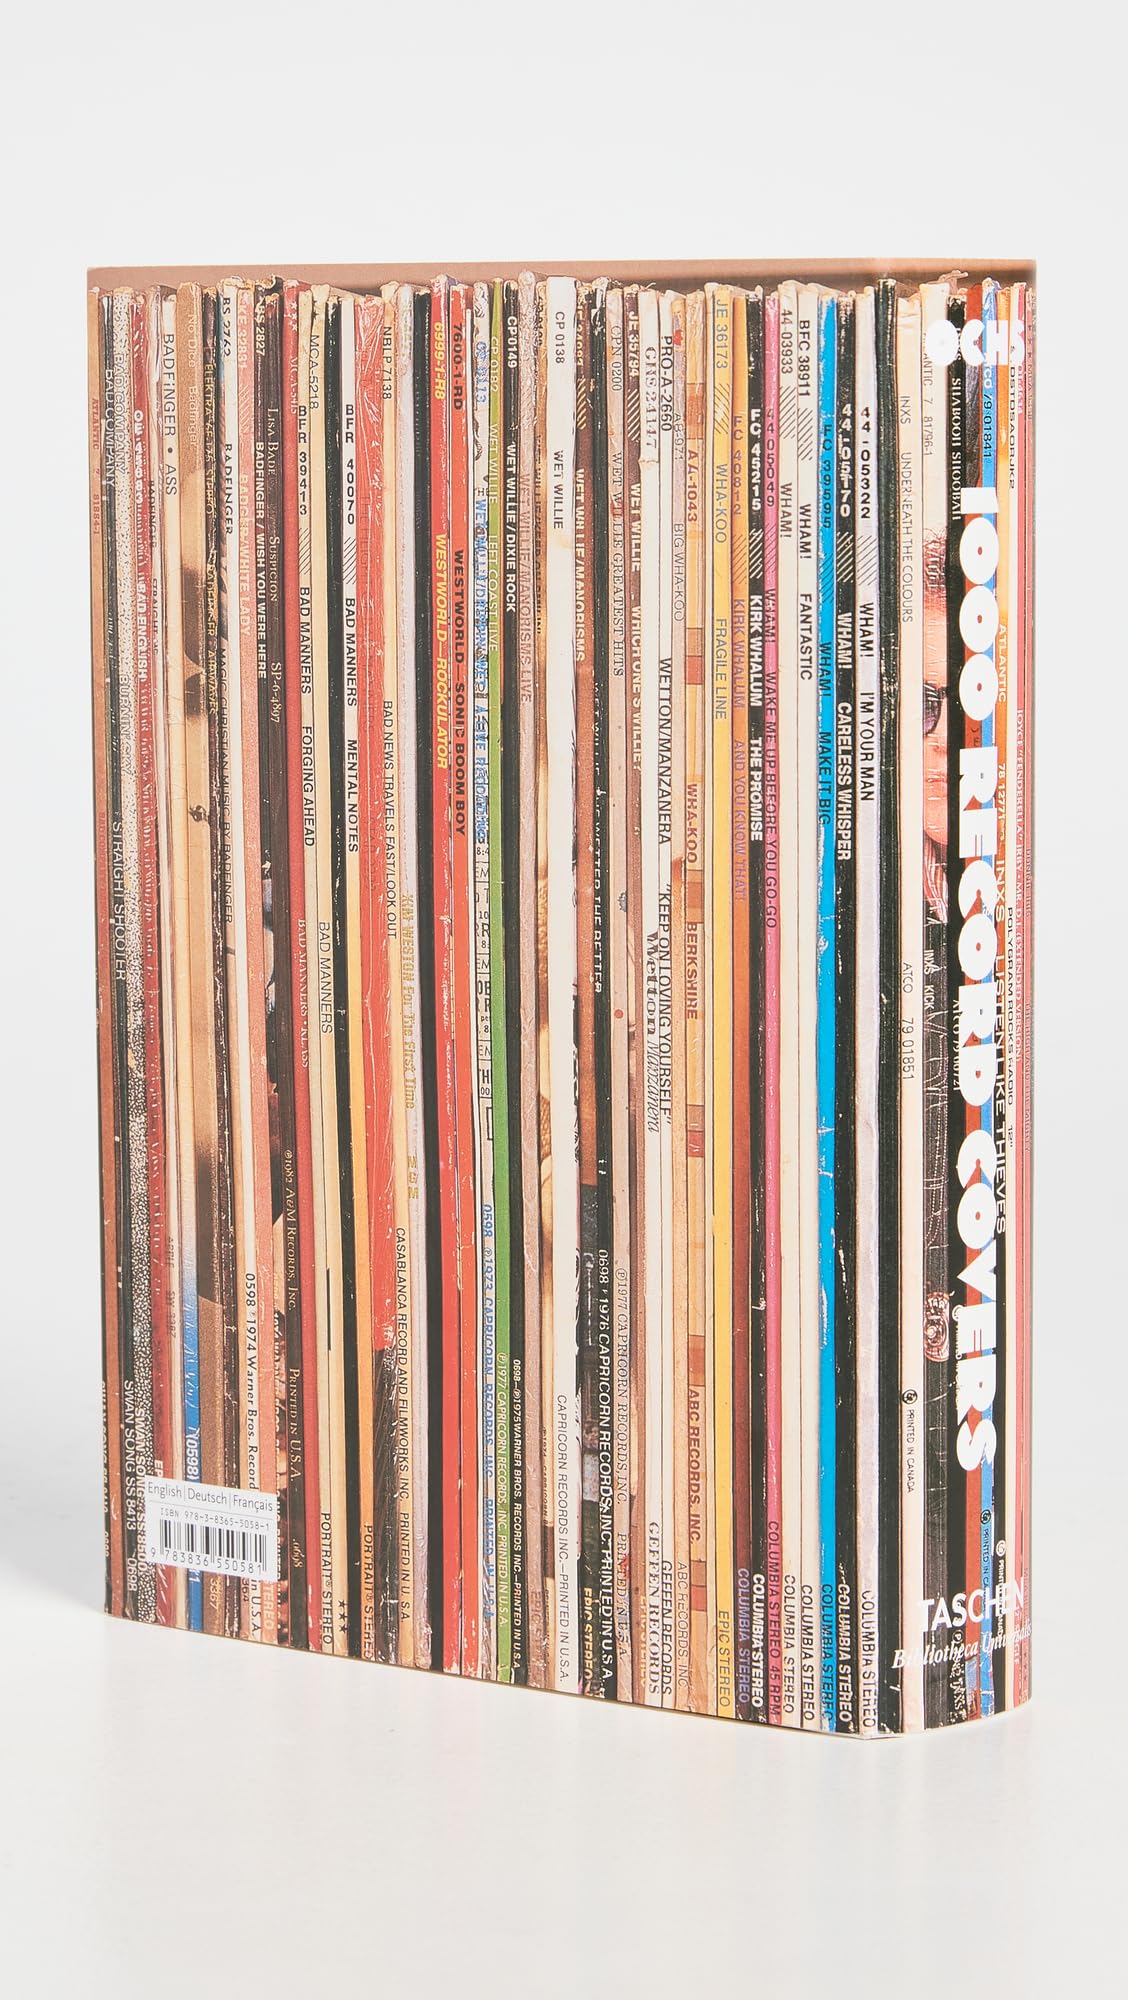 Taschen Women's 1000 Record Covers, Multi, One Size